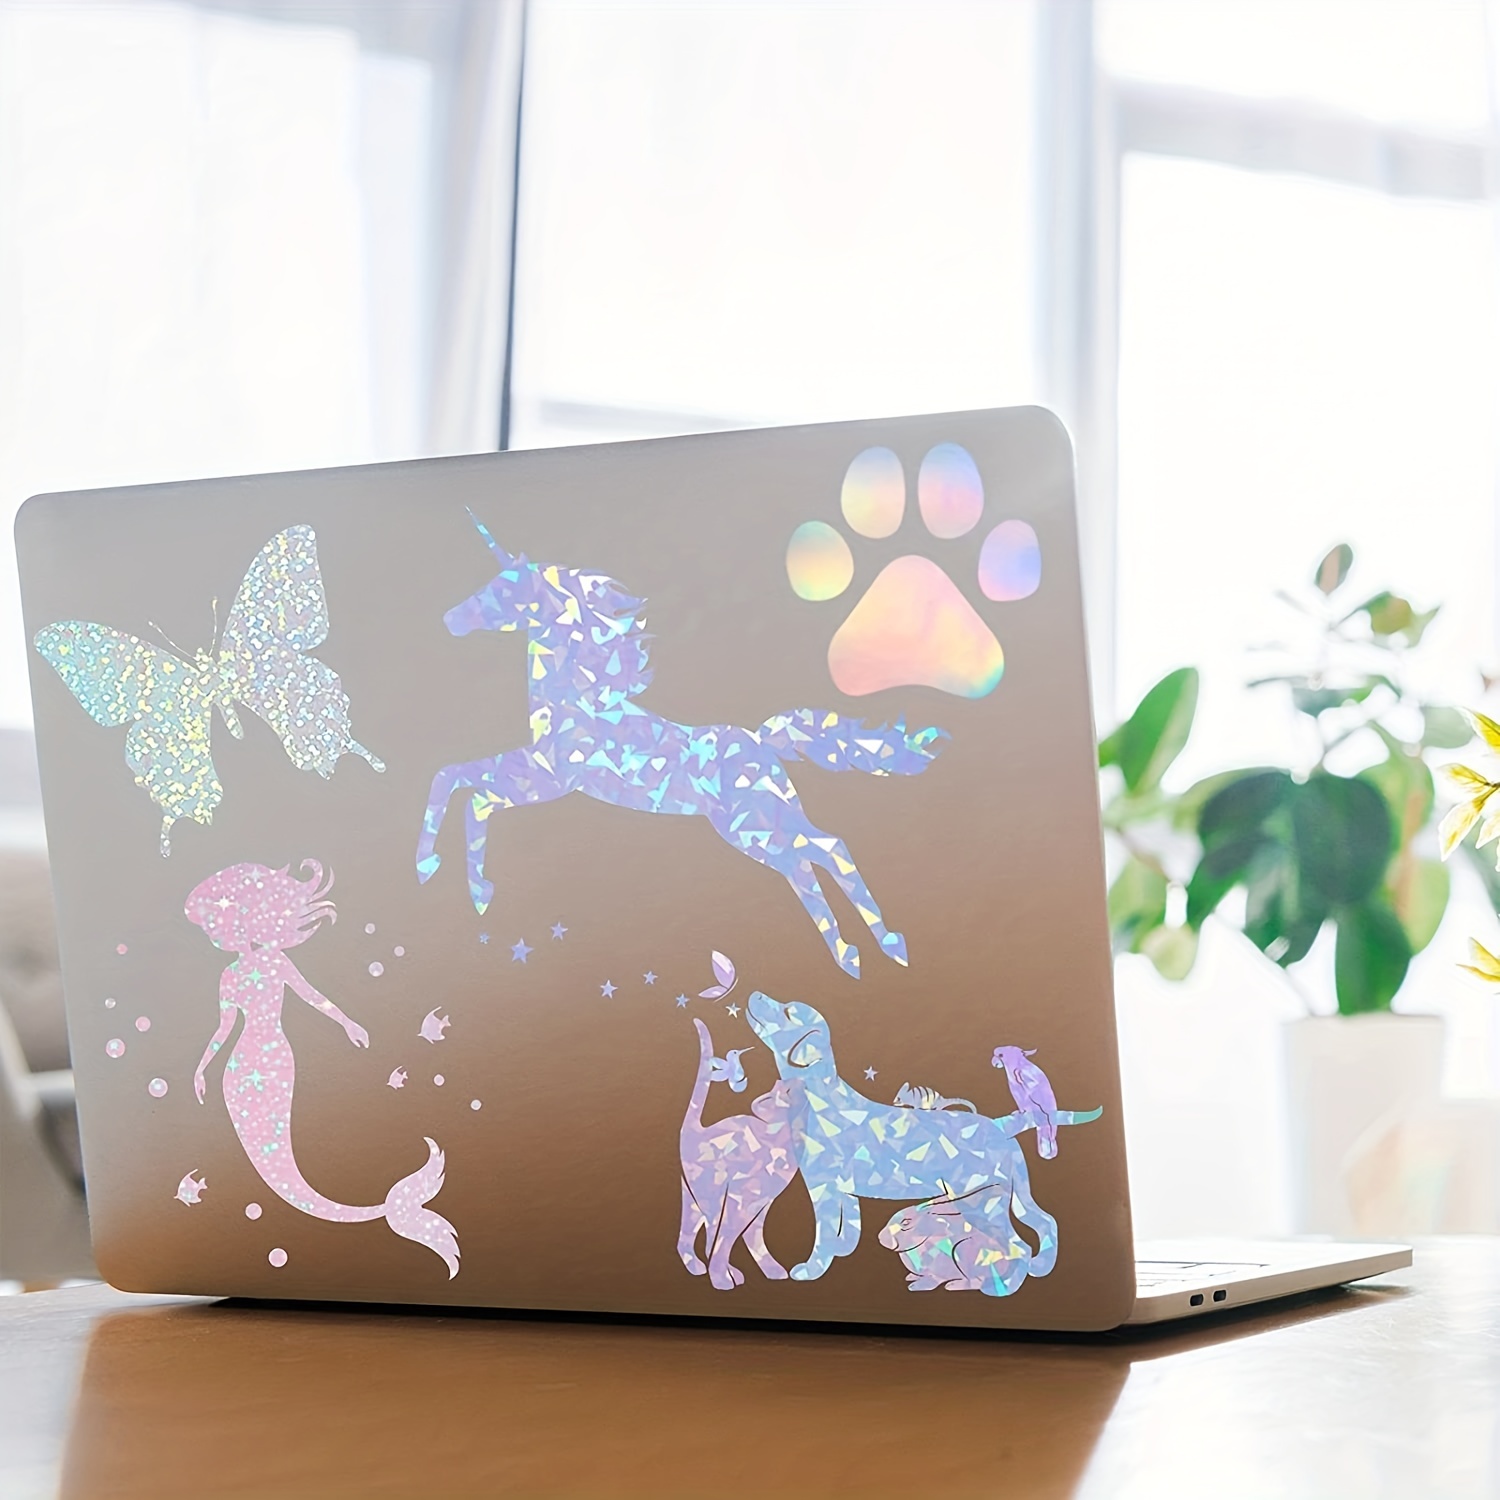 15 Sheets Koala Holographic Sticker Paper Clear RAINBOW, Transparent Clear  Self-Adhesive Laminting Sheets A4 